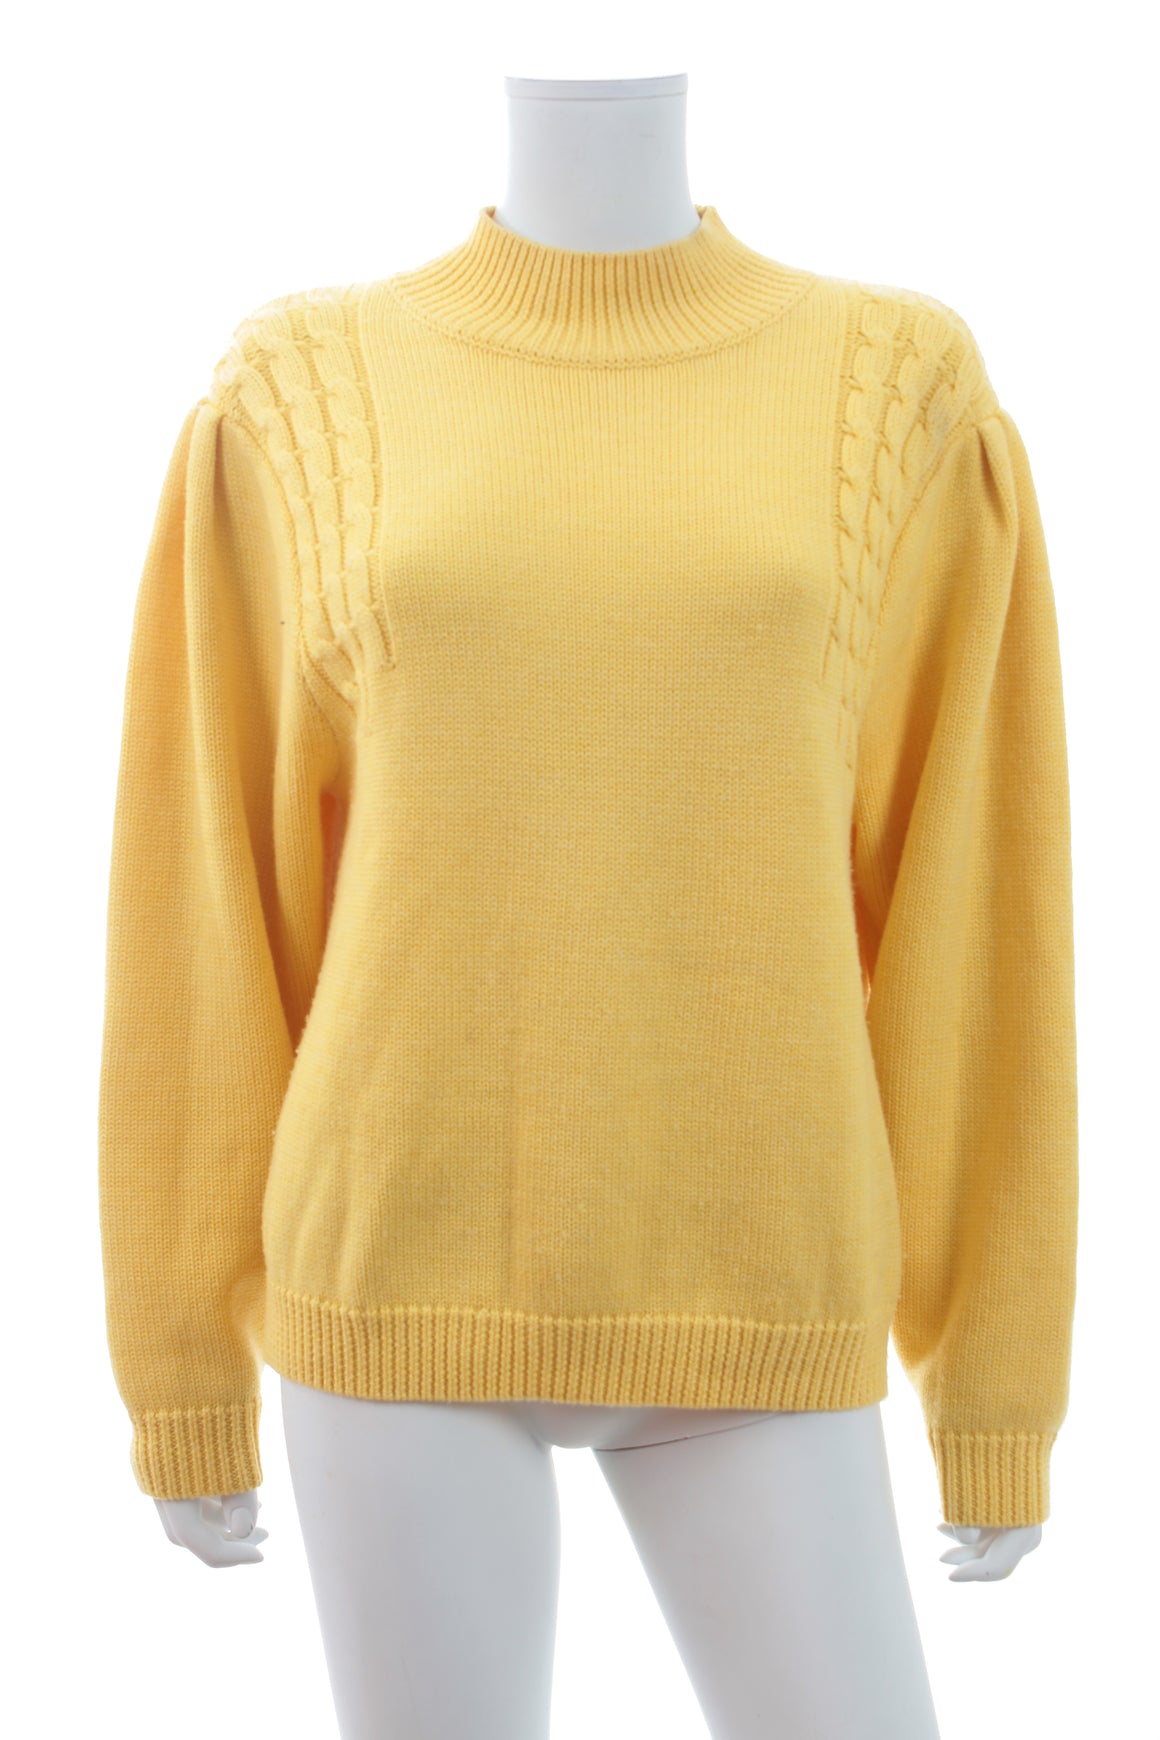 Emilia Wickstead Cable-Detail Wool High-Neck Sweater